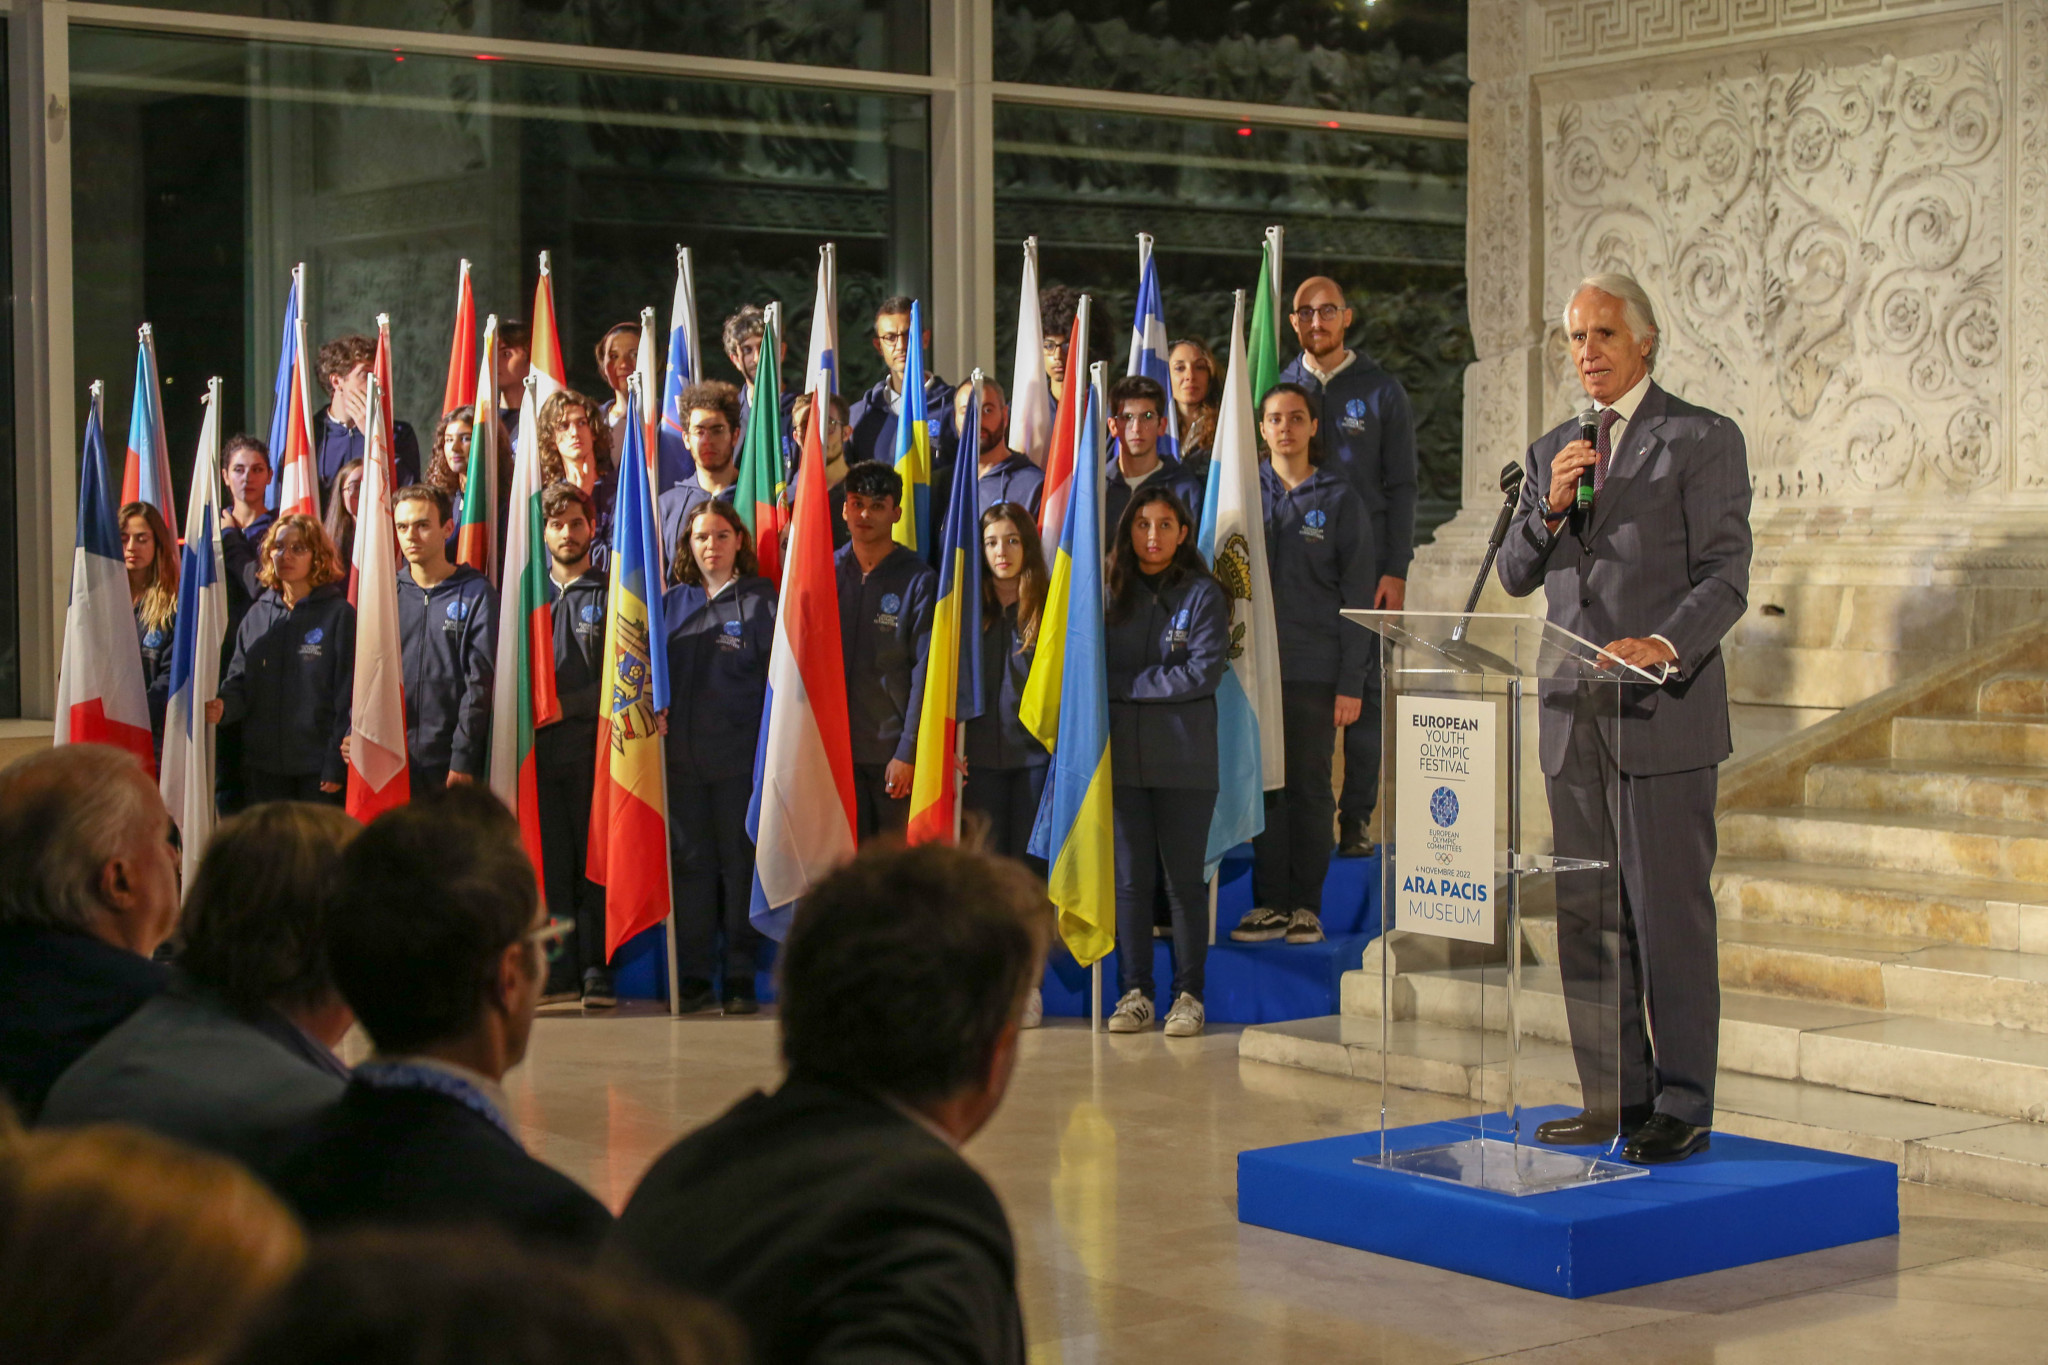 Italian National Olympic Committee President Giovanni Malagò stated that Friuli Venezia Giulia 2023 would help lead towards Italy's hosting of the 2026 Winter Olympic Games ©EOC